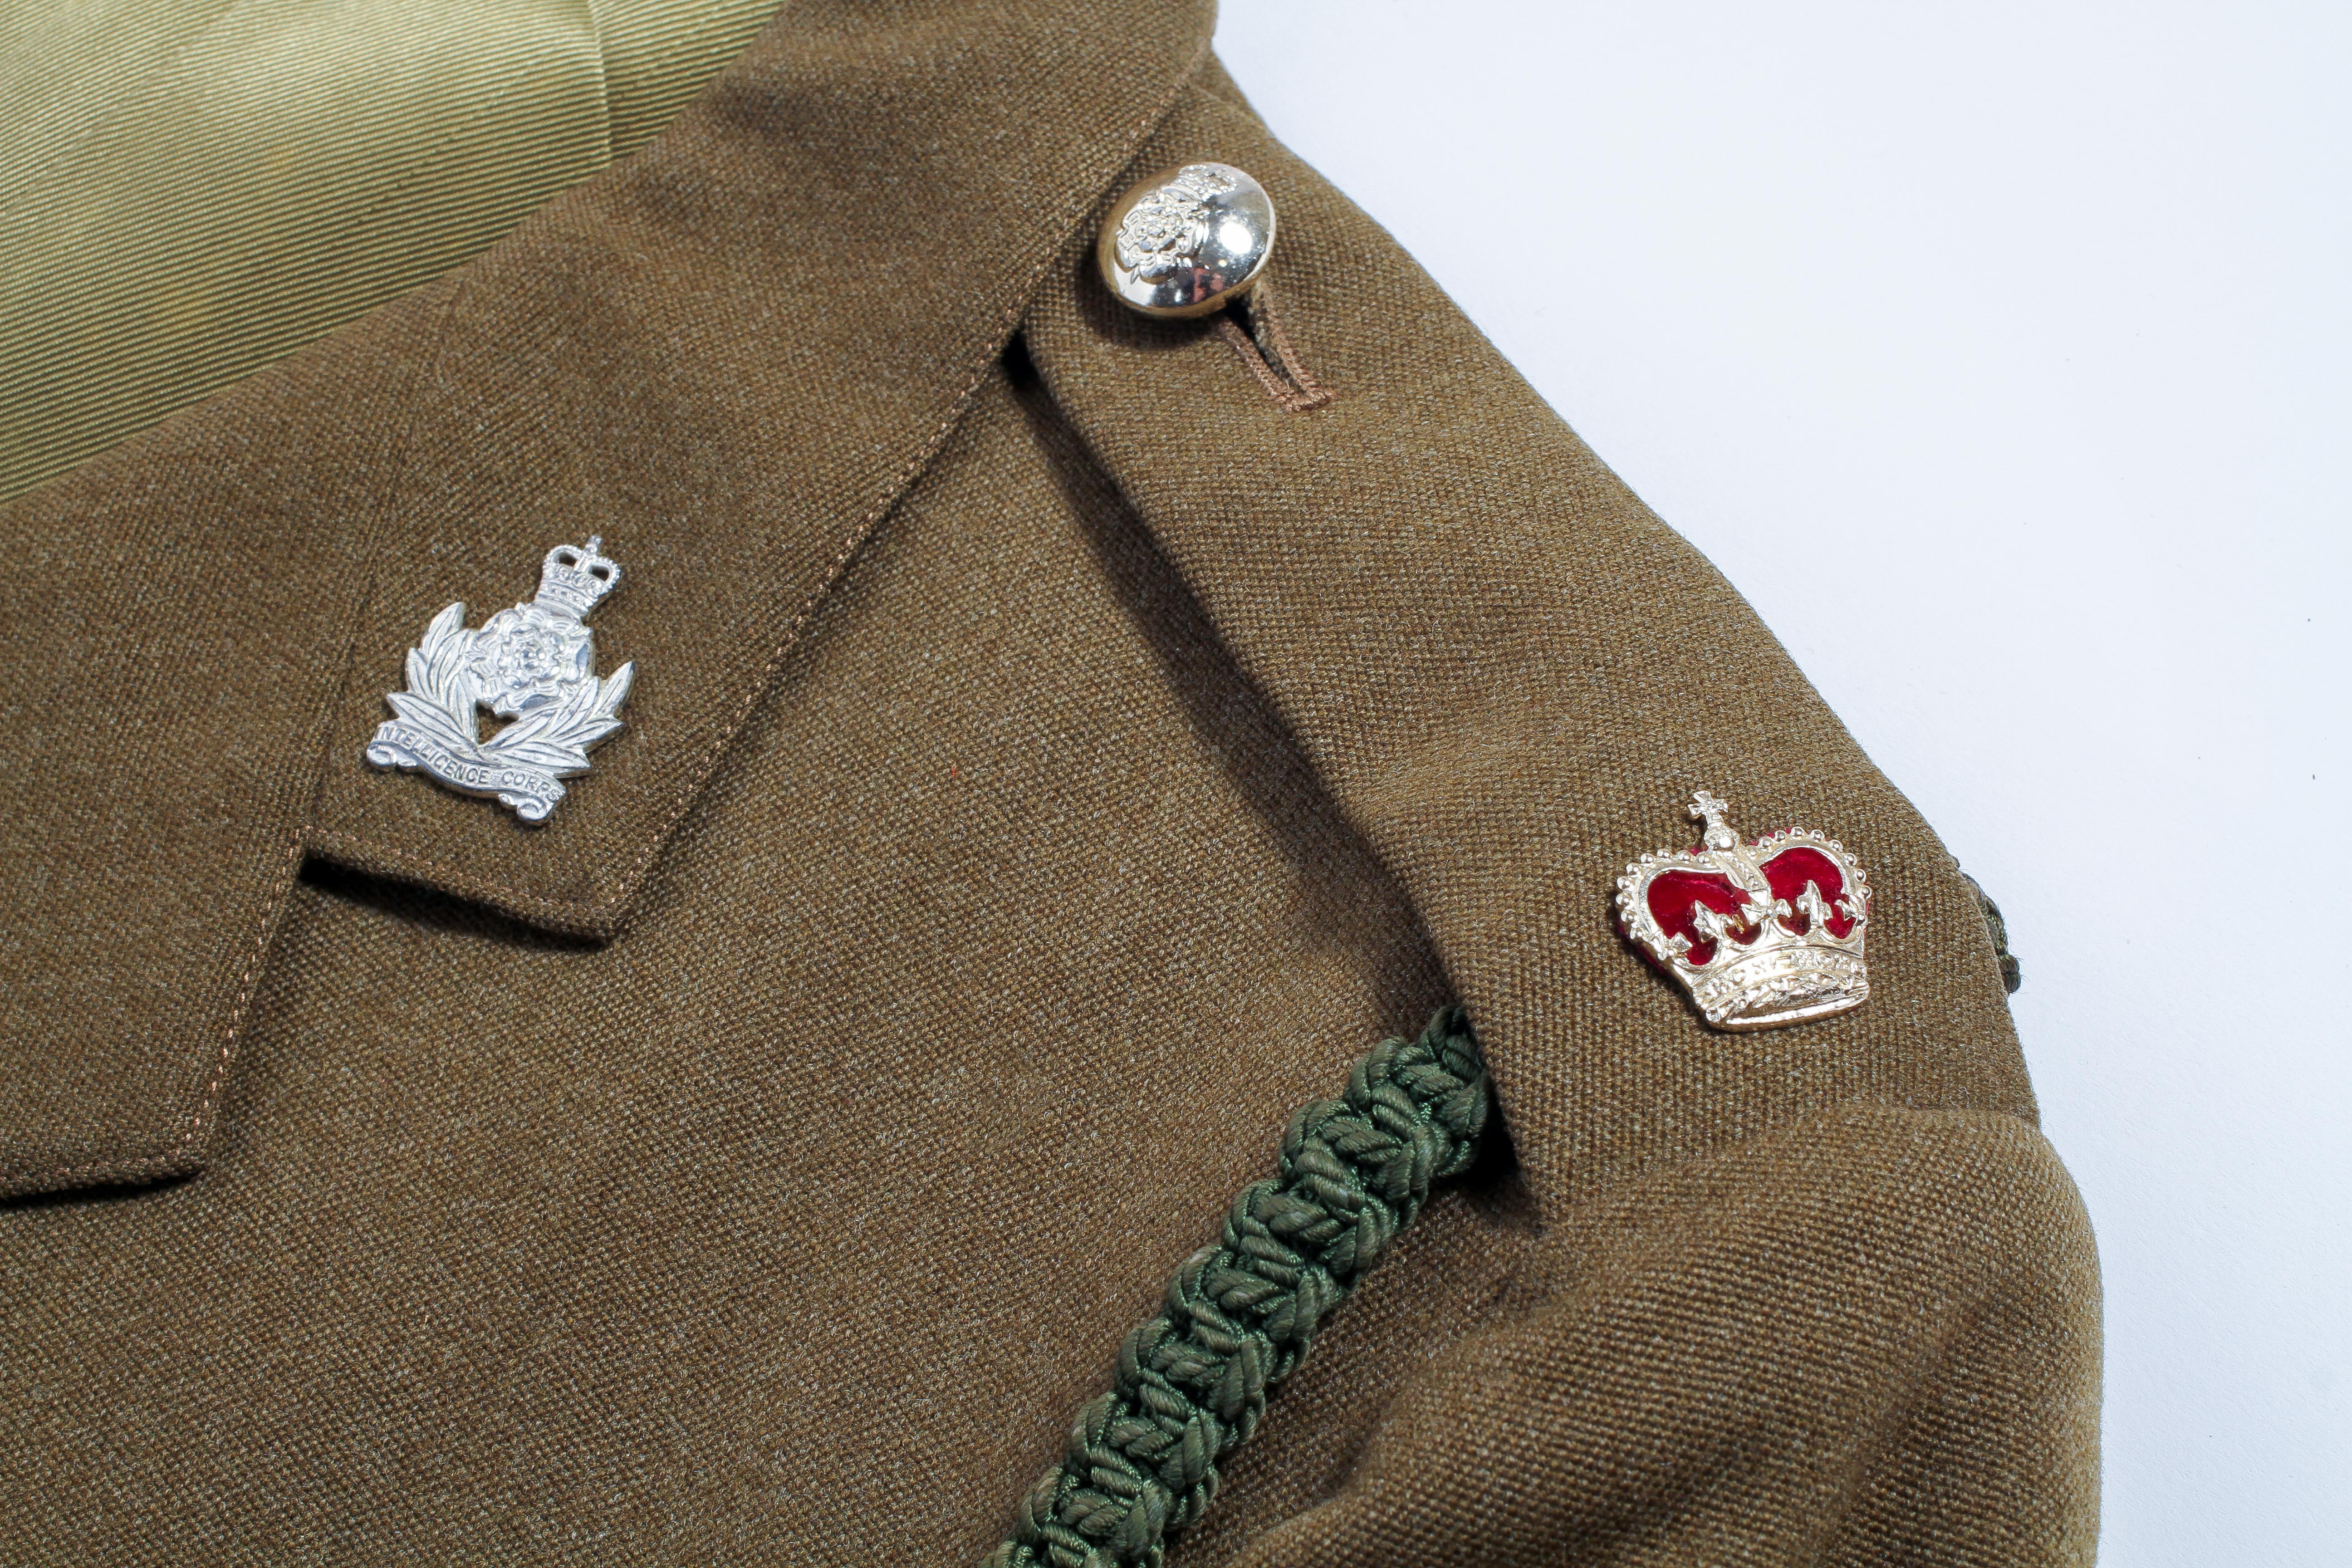 A 20th century British military army coat, - Image 2 of 4